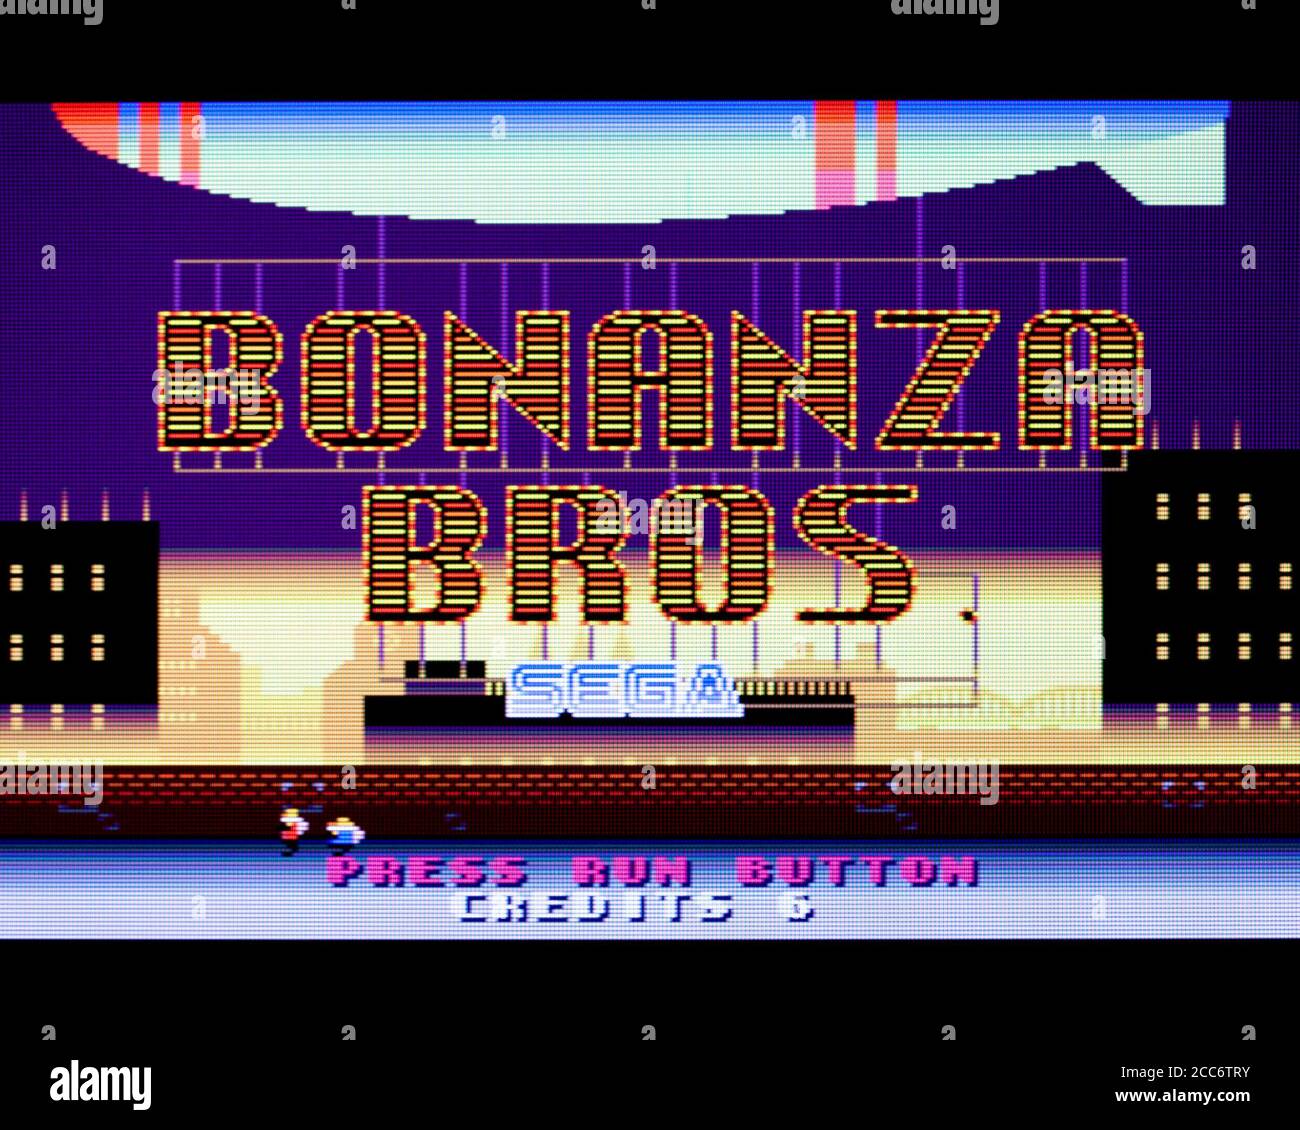 Bonanza Bros - PC Engine CD Videogame - Editorial use only Stock Photo